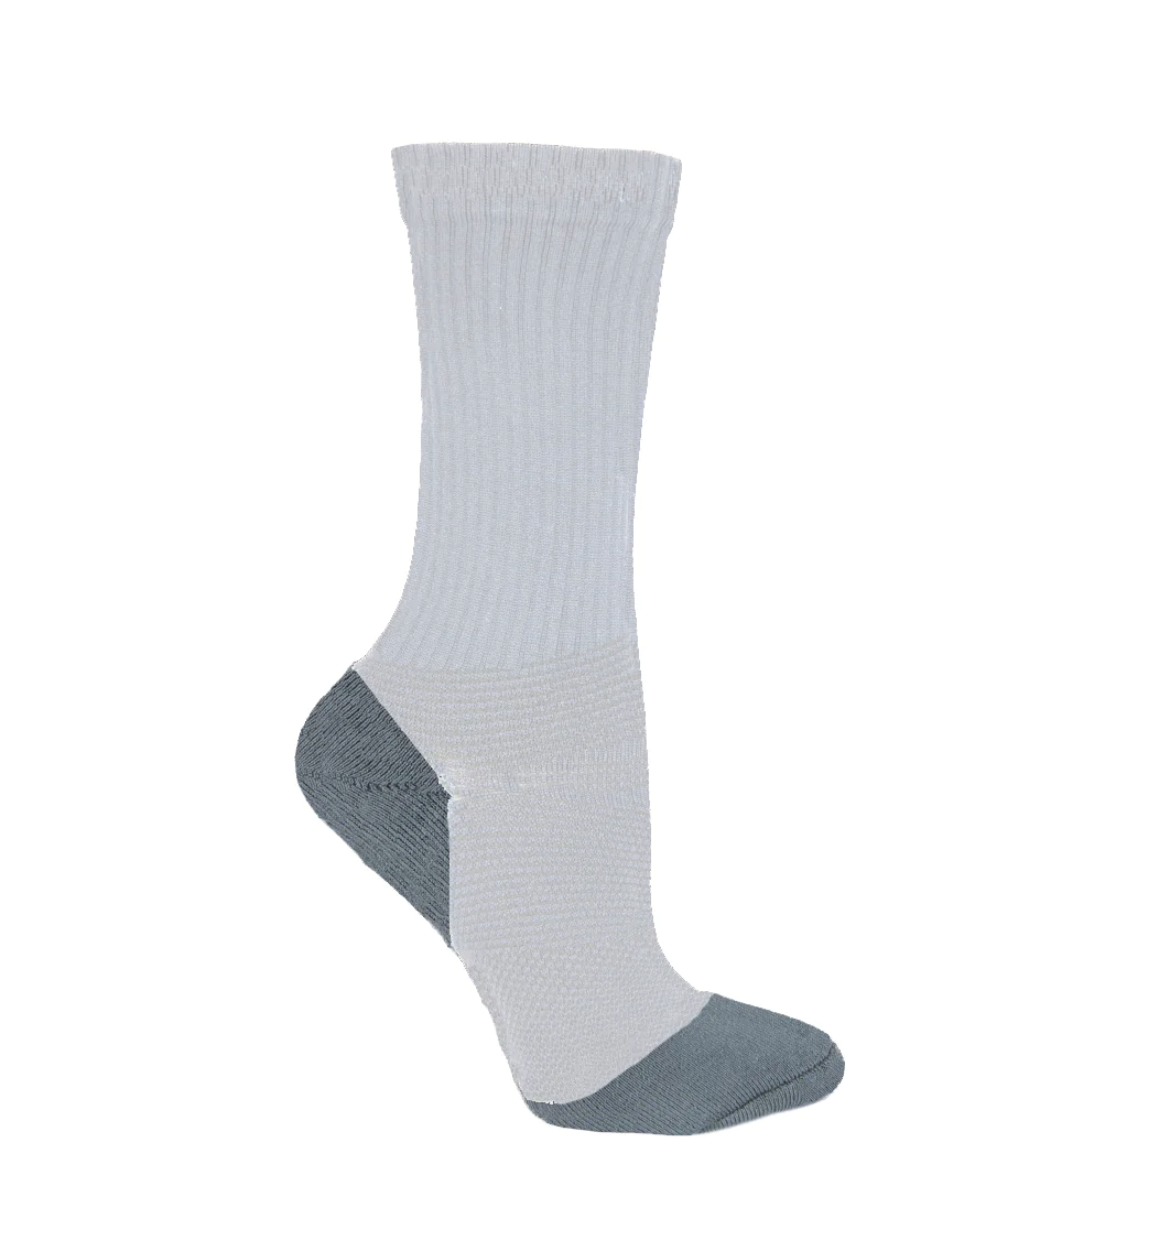 Ultimate Performance Compression Cotton Crew Socks - Aussie Made